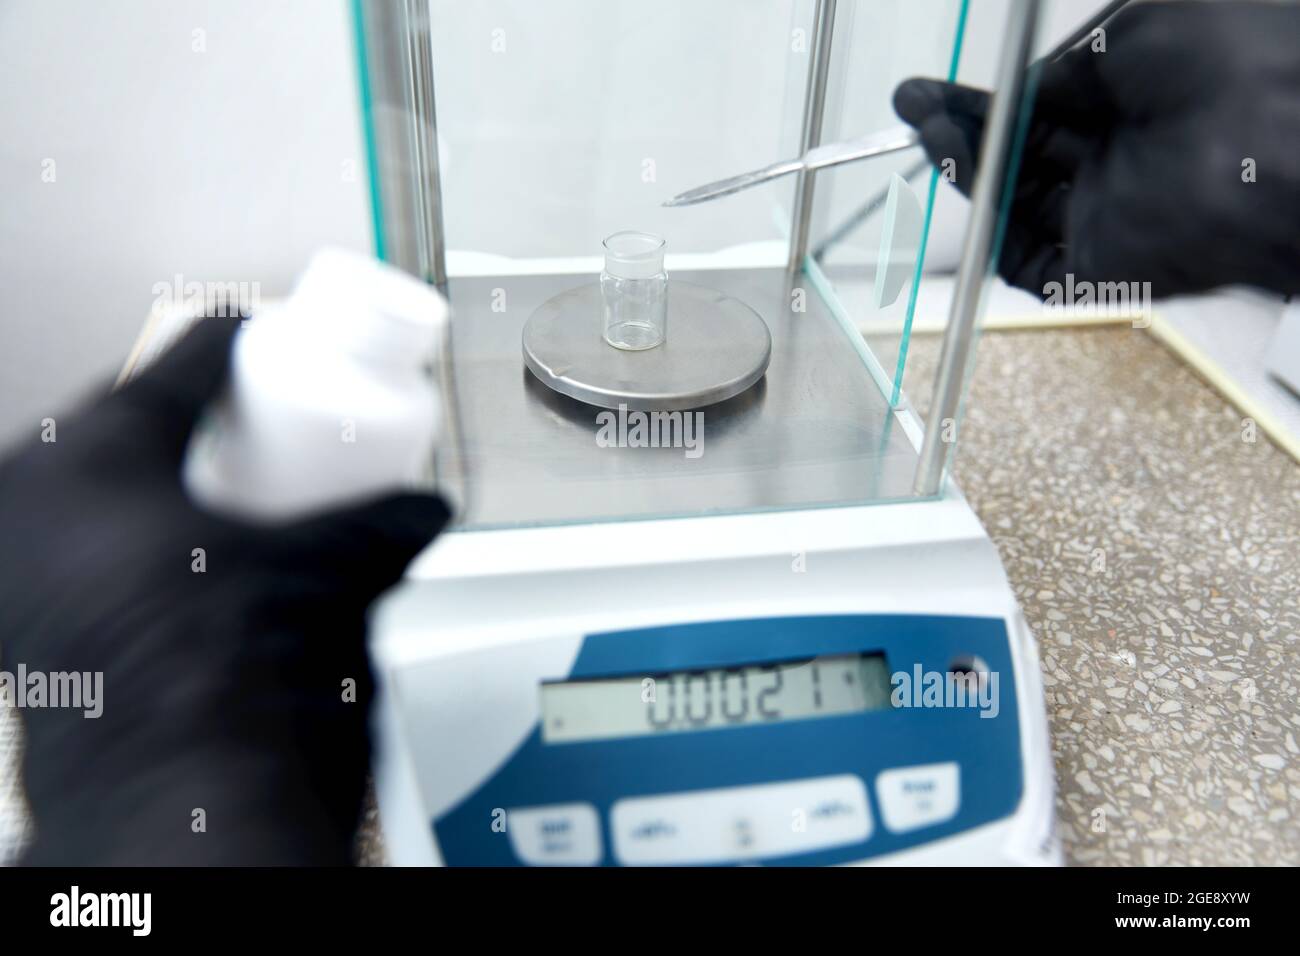 https://c8.alamy.com/comp/2GE8XYW/scientist-weighing-chemicals-by-digital-scales-in-grams-in-chemical-laboratory-2GE8XYW.jpg